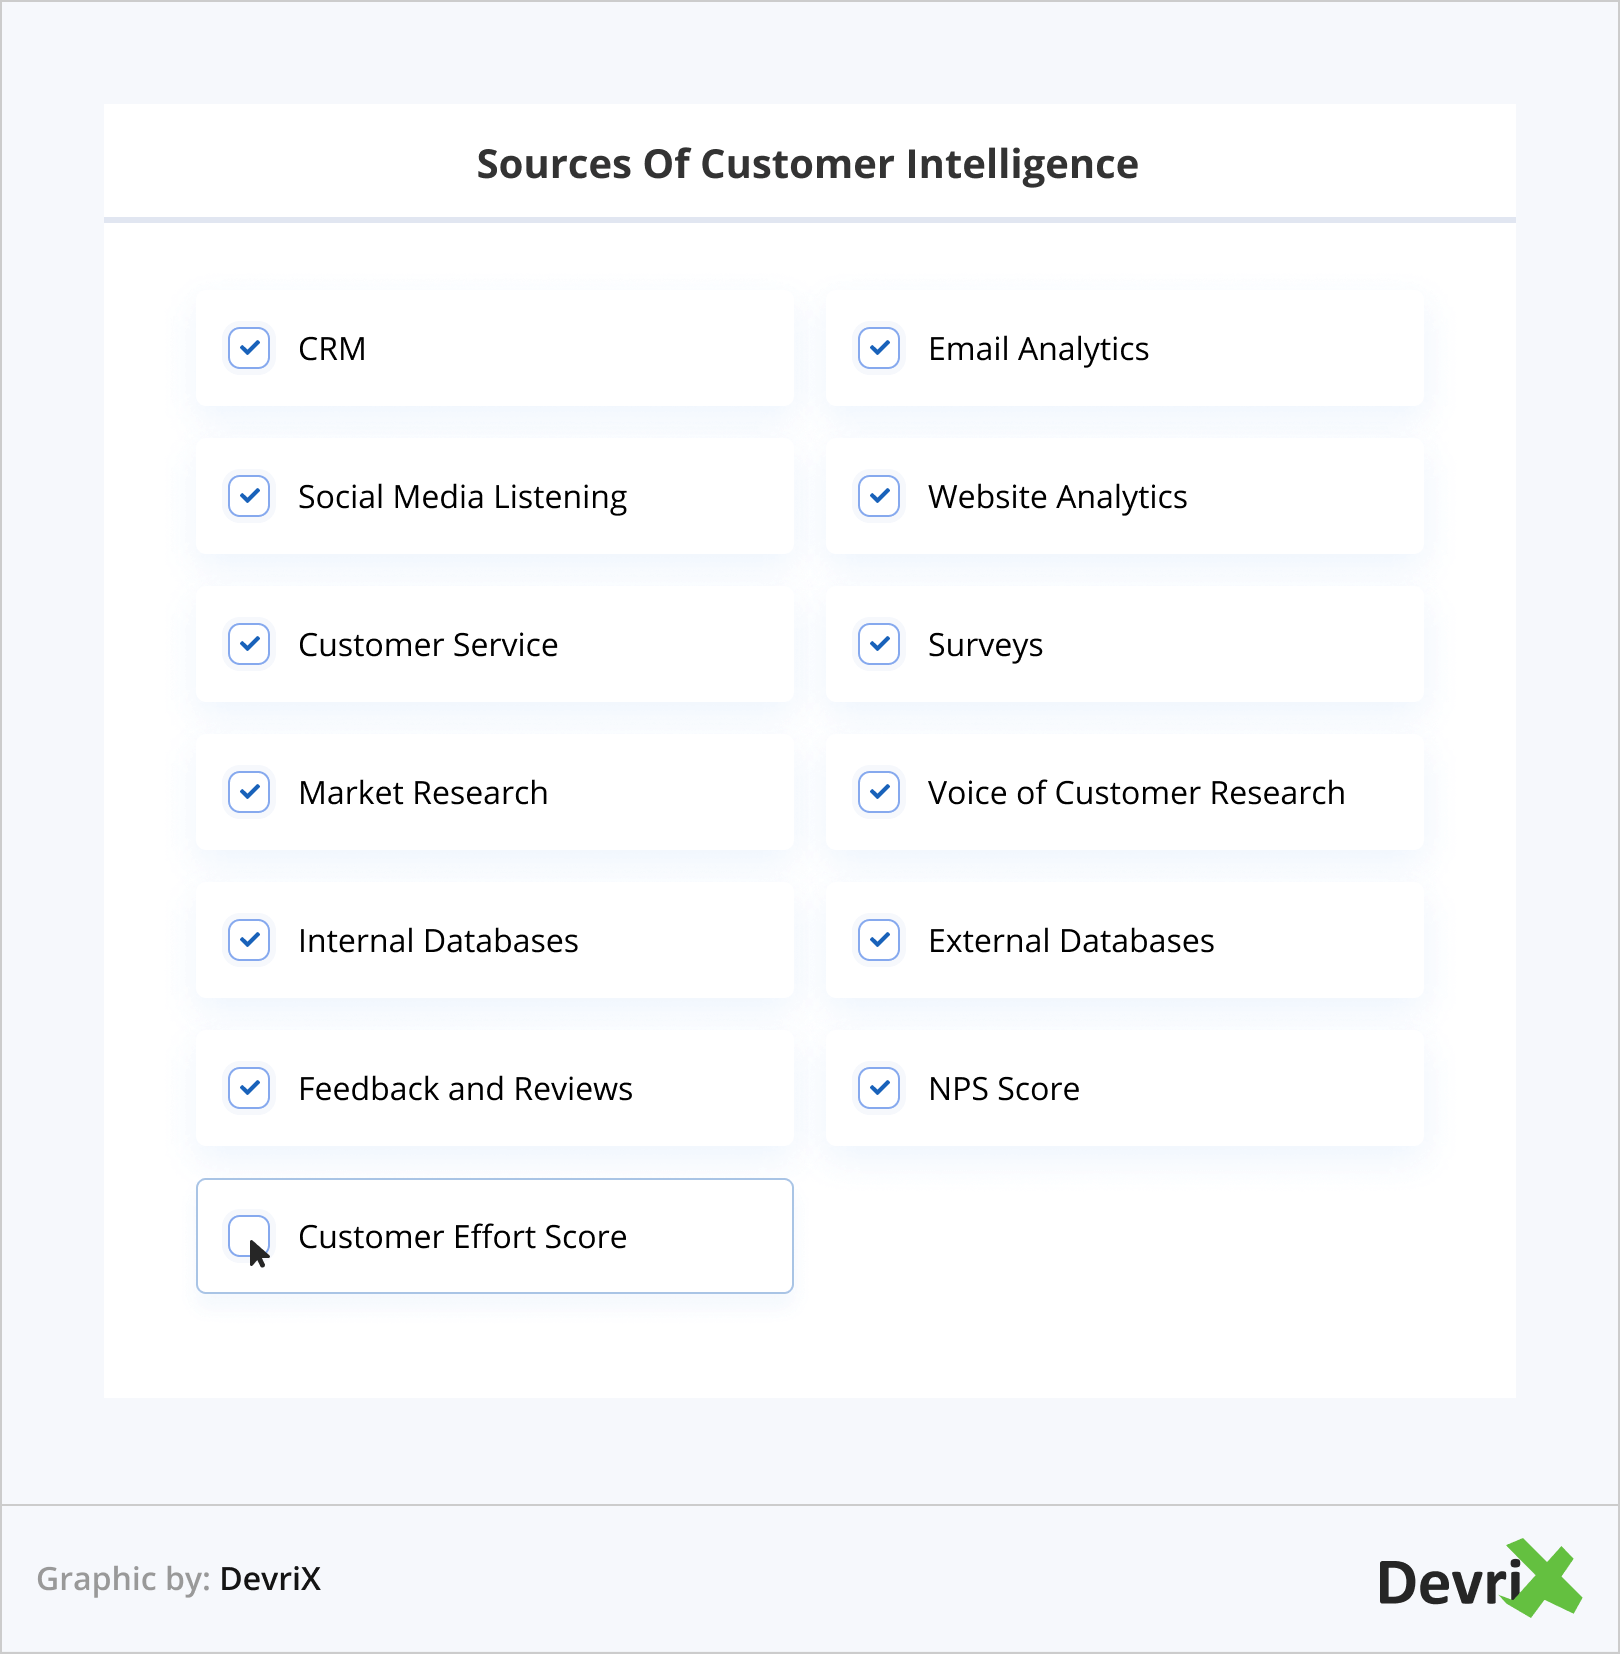 Sources Of Customer Intelligence